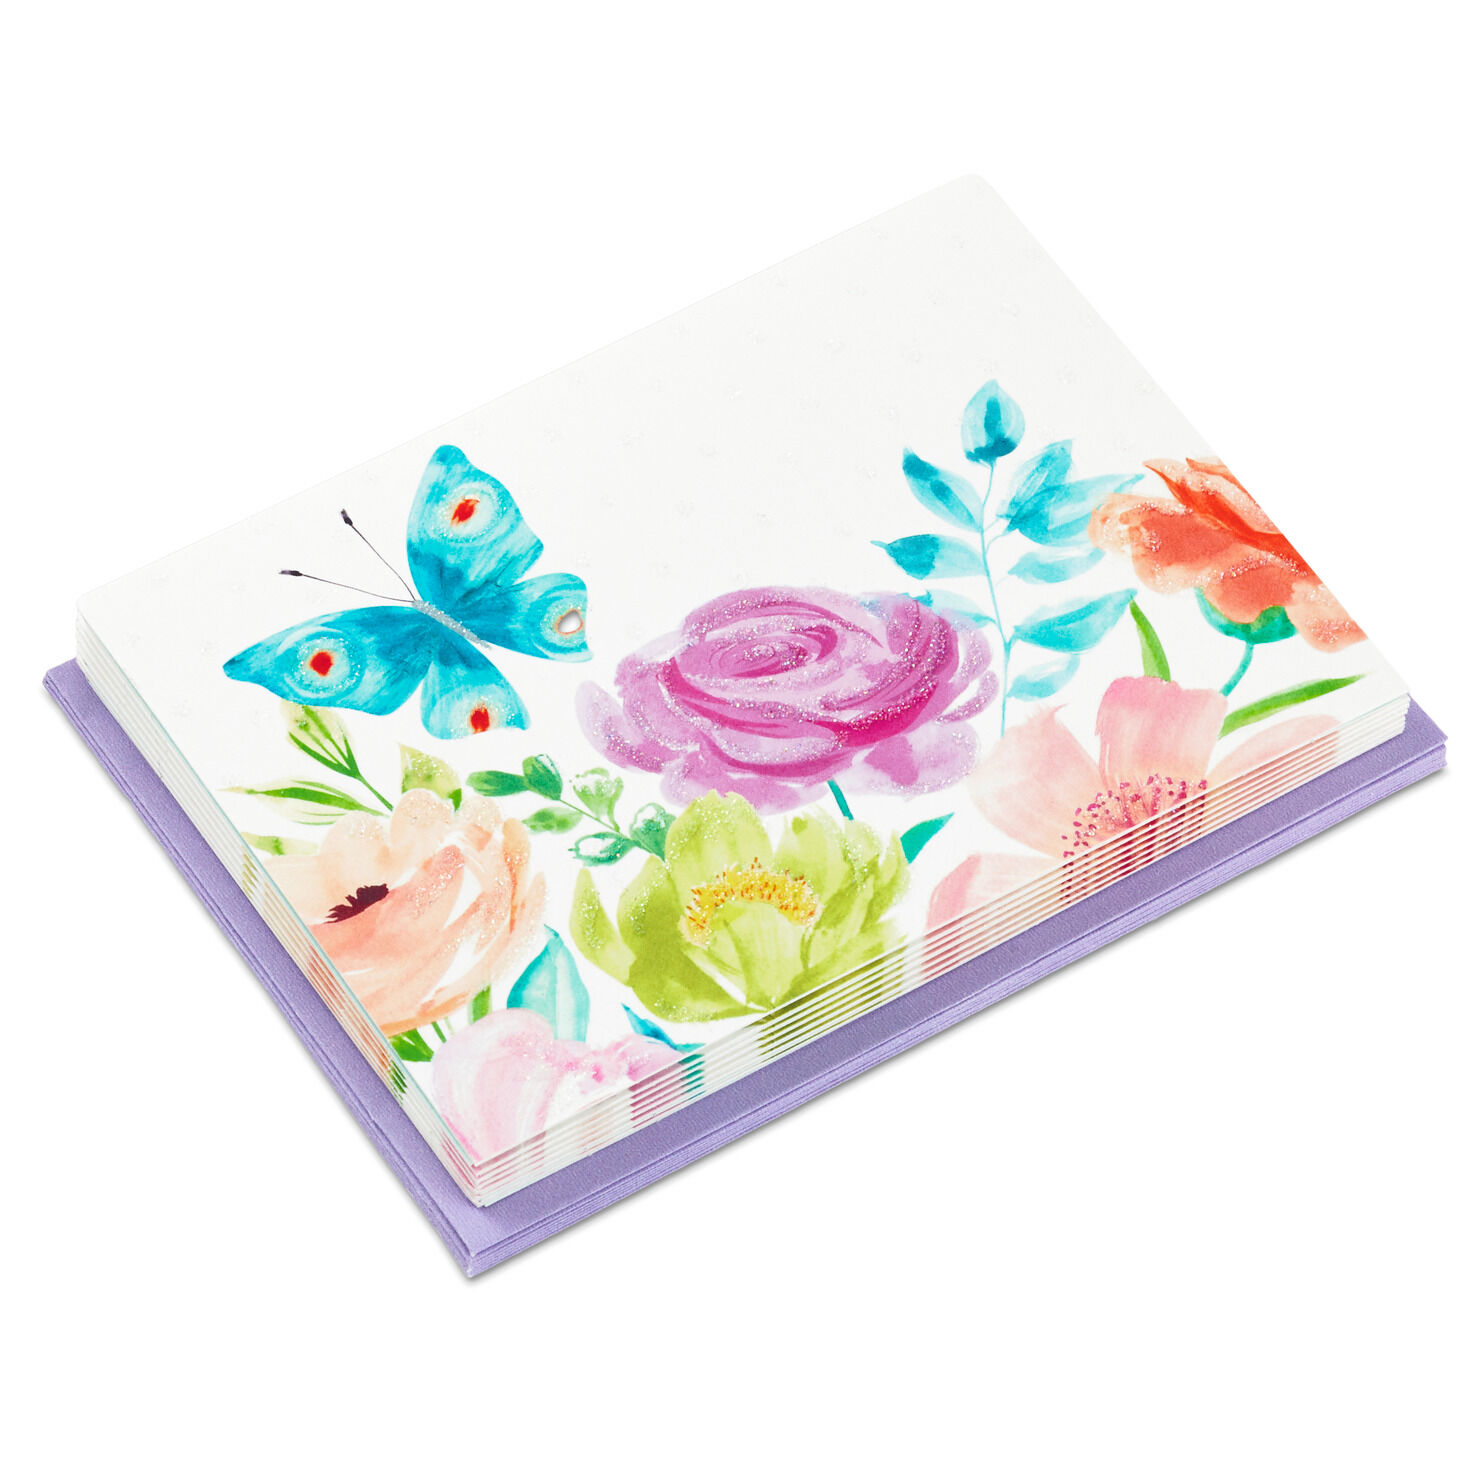 Details about   4 Butterfly Garden Fantasy floral  Dimensional blank greeting cards w envelopes 